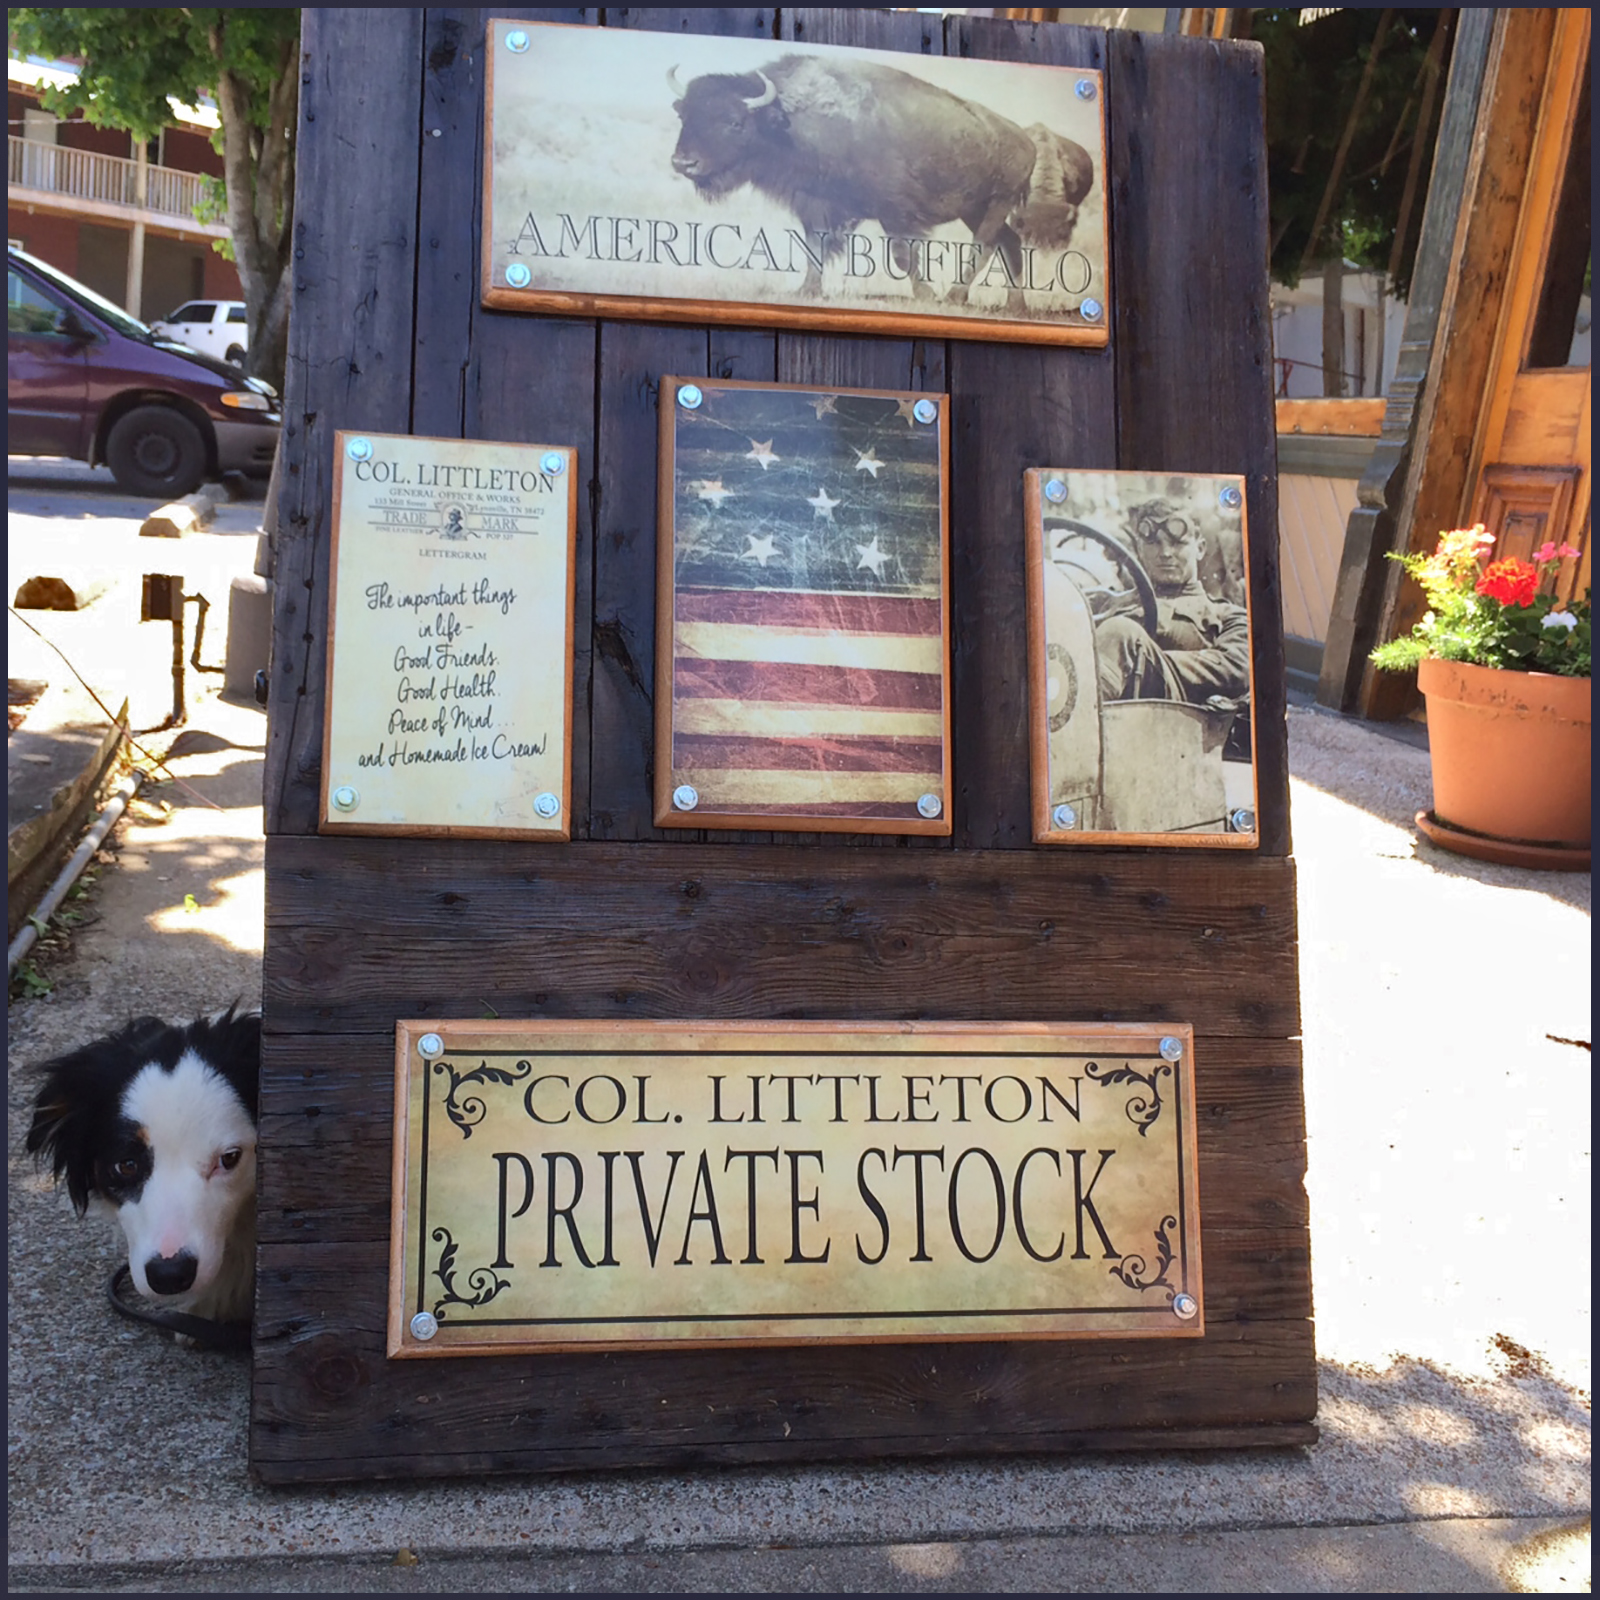 Colonel Littleton wooden a-frame sign for the Private Stock Store in Lynnville, TN, with a Australian Shepherd dog peeking out behind it.